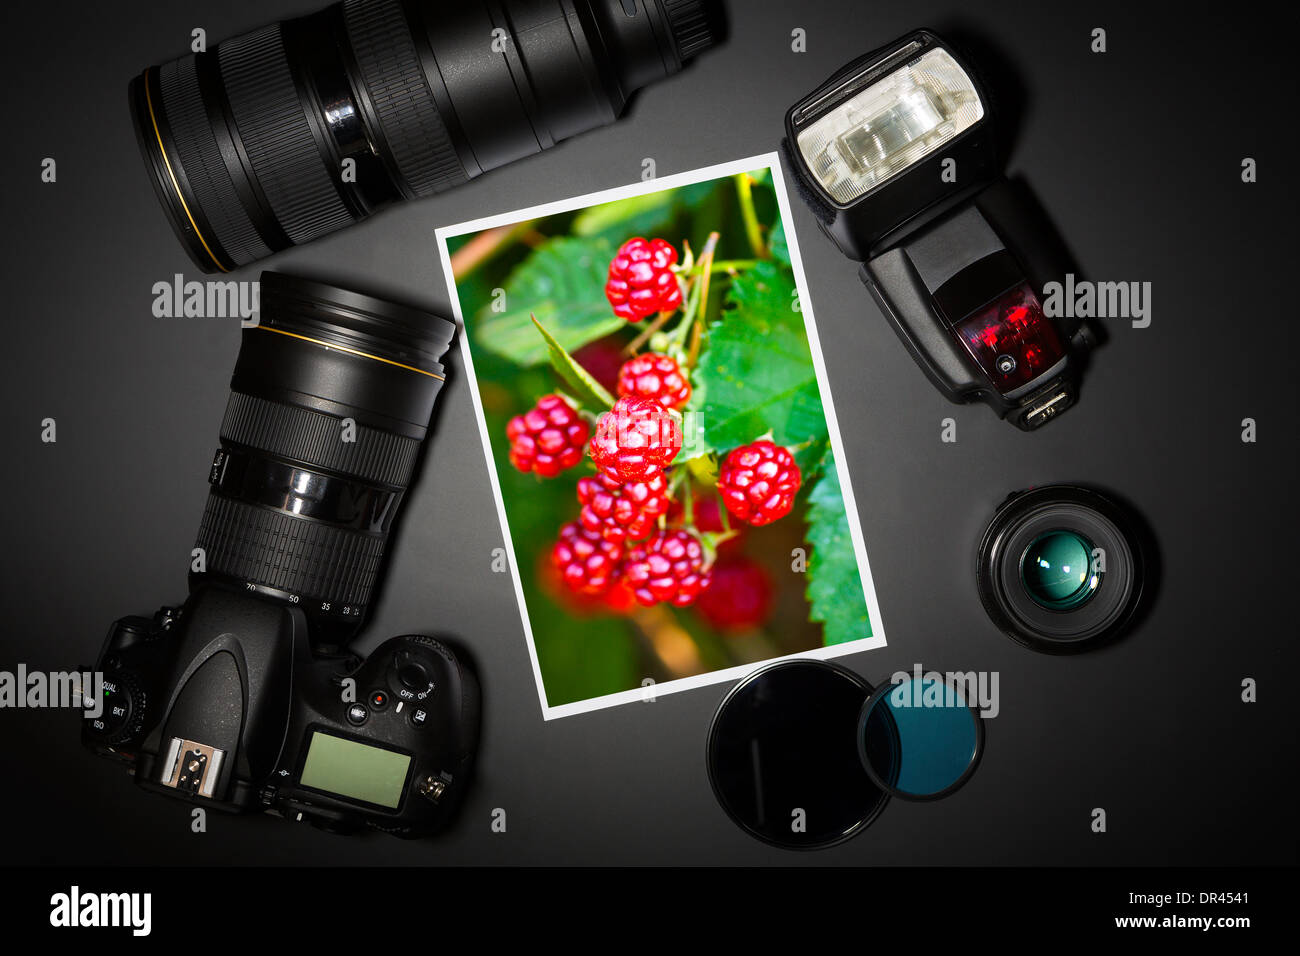 camera and lense on black showing photographer still life Stock Photo